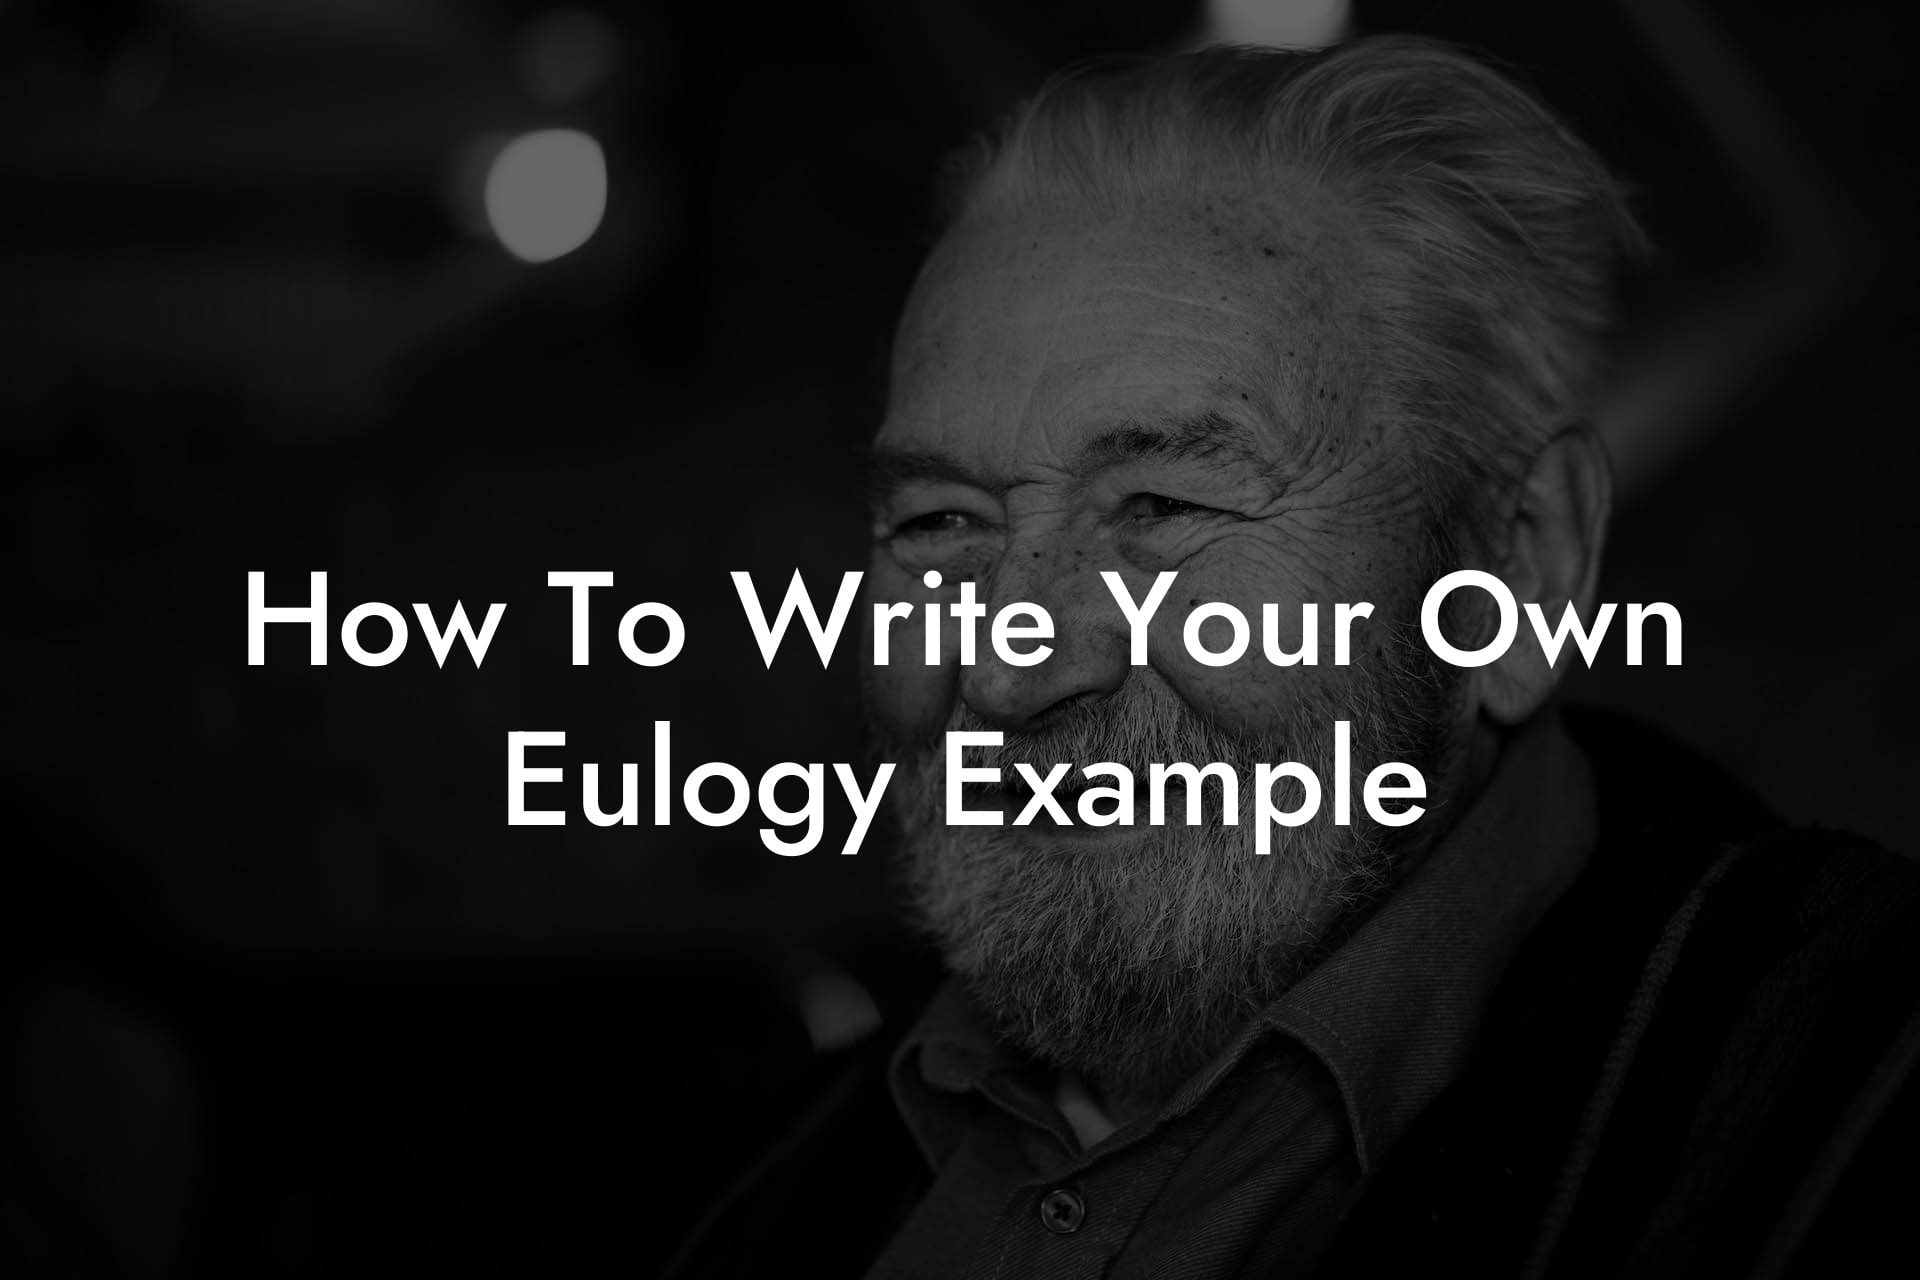 How To Write Your Own Eulogy Example